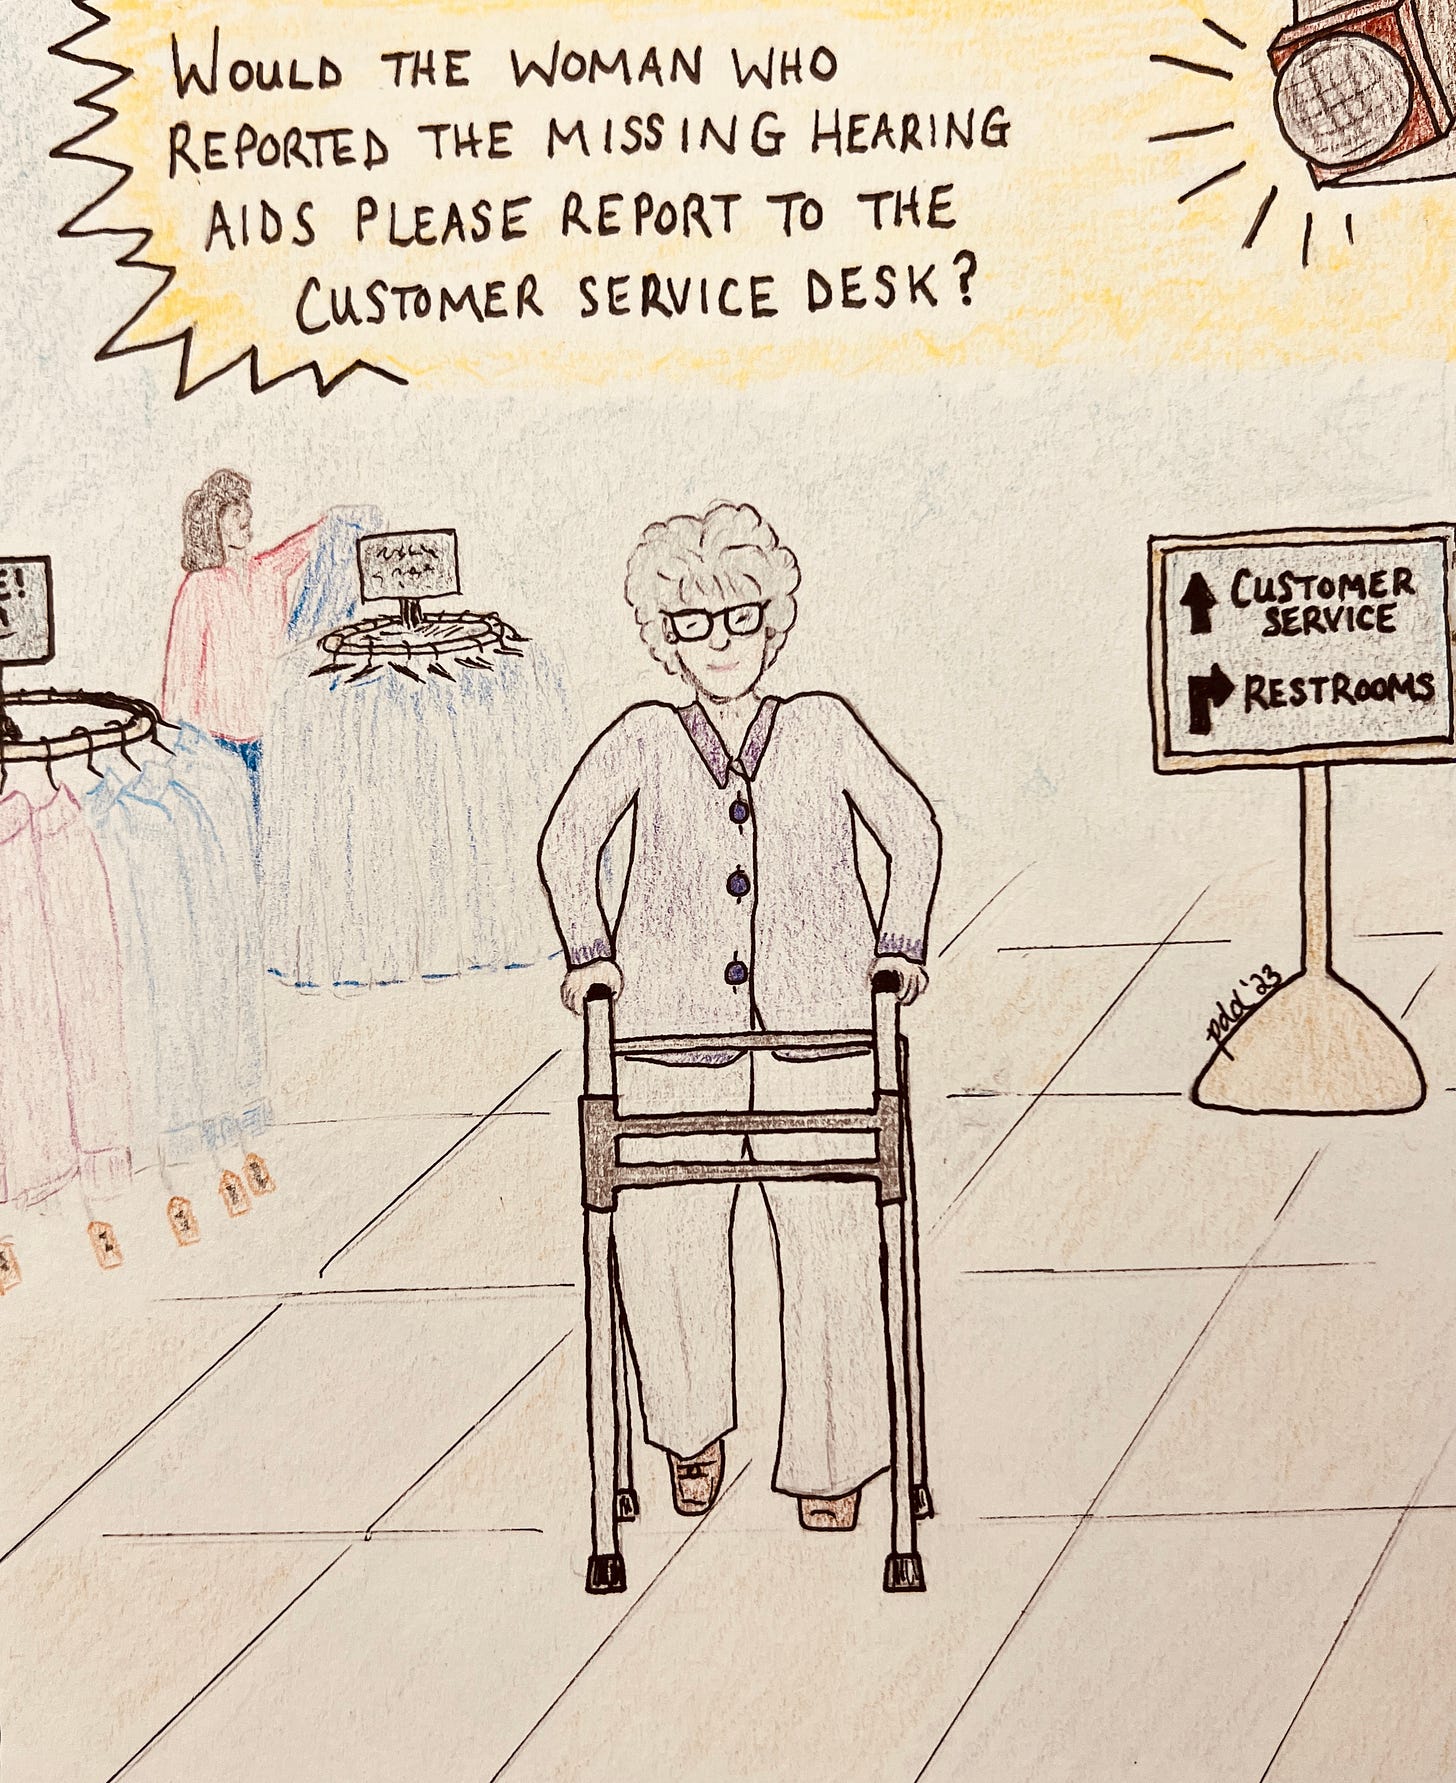 Woman using a walker in a department store, oblivious to the P.A. announcement that asks, “Would the woman who reported the missing hearing aids please report to the customer service desk?”